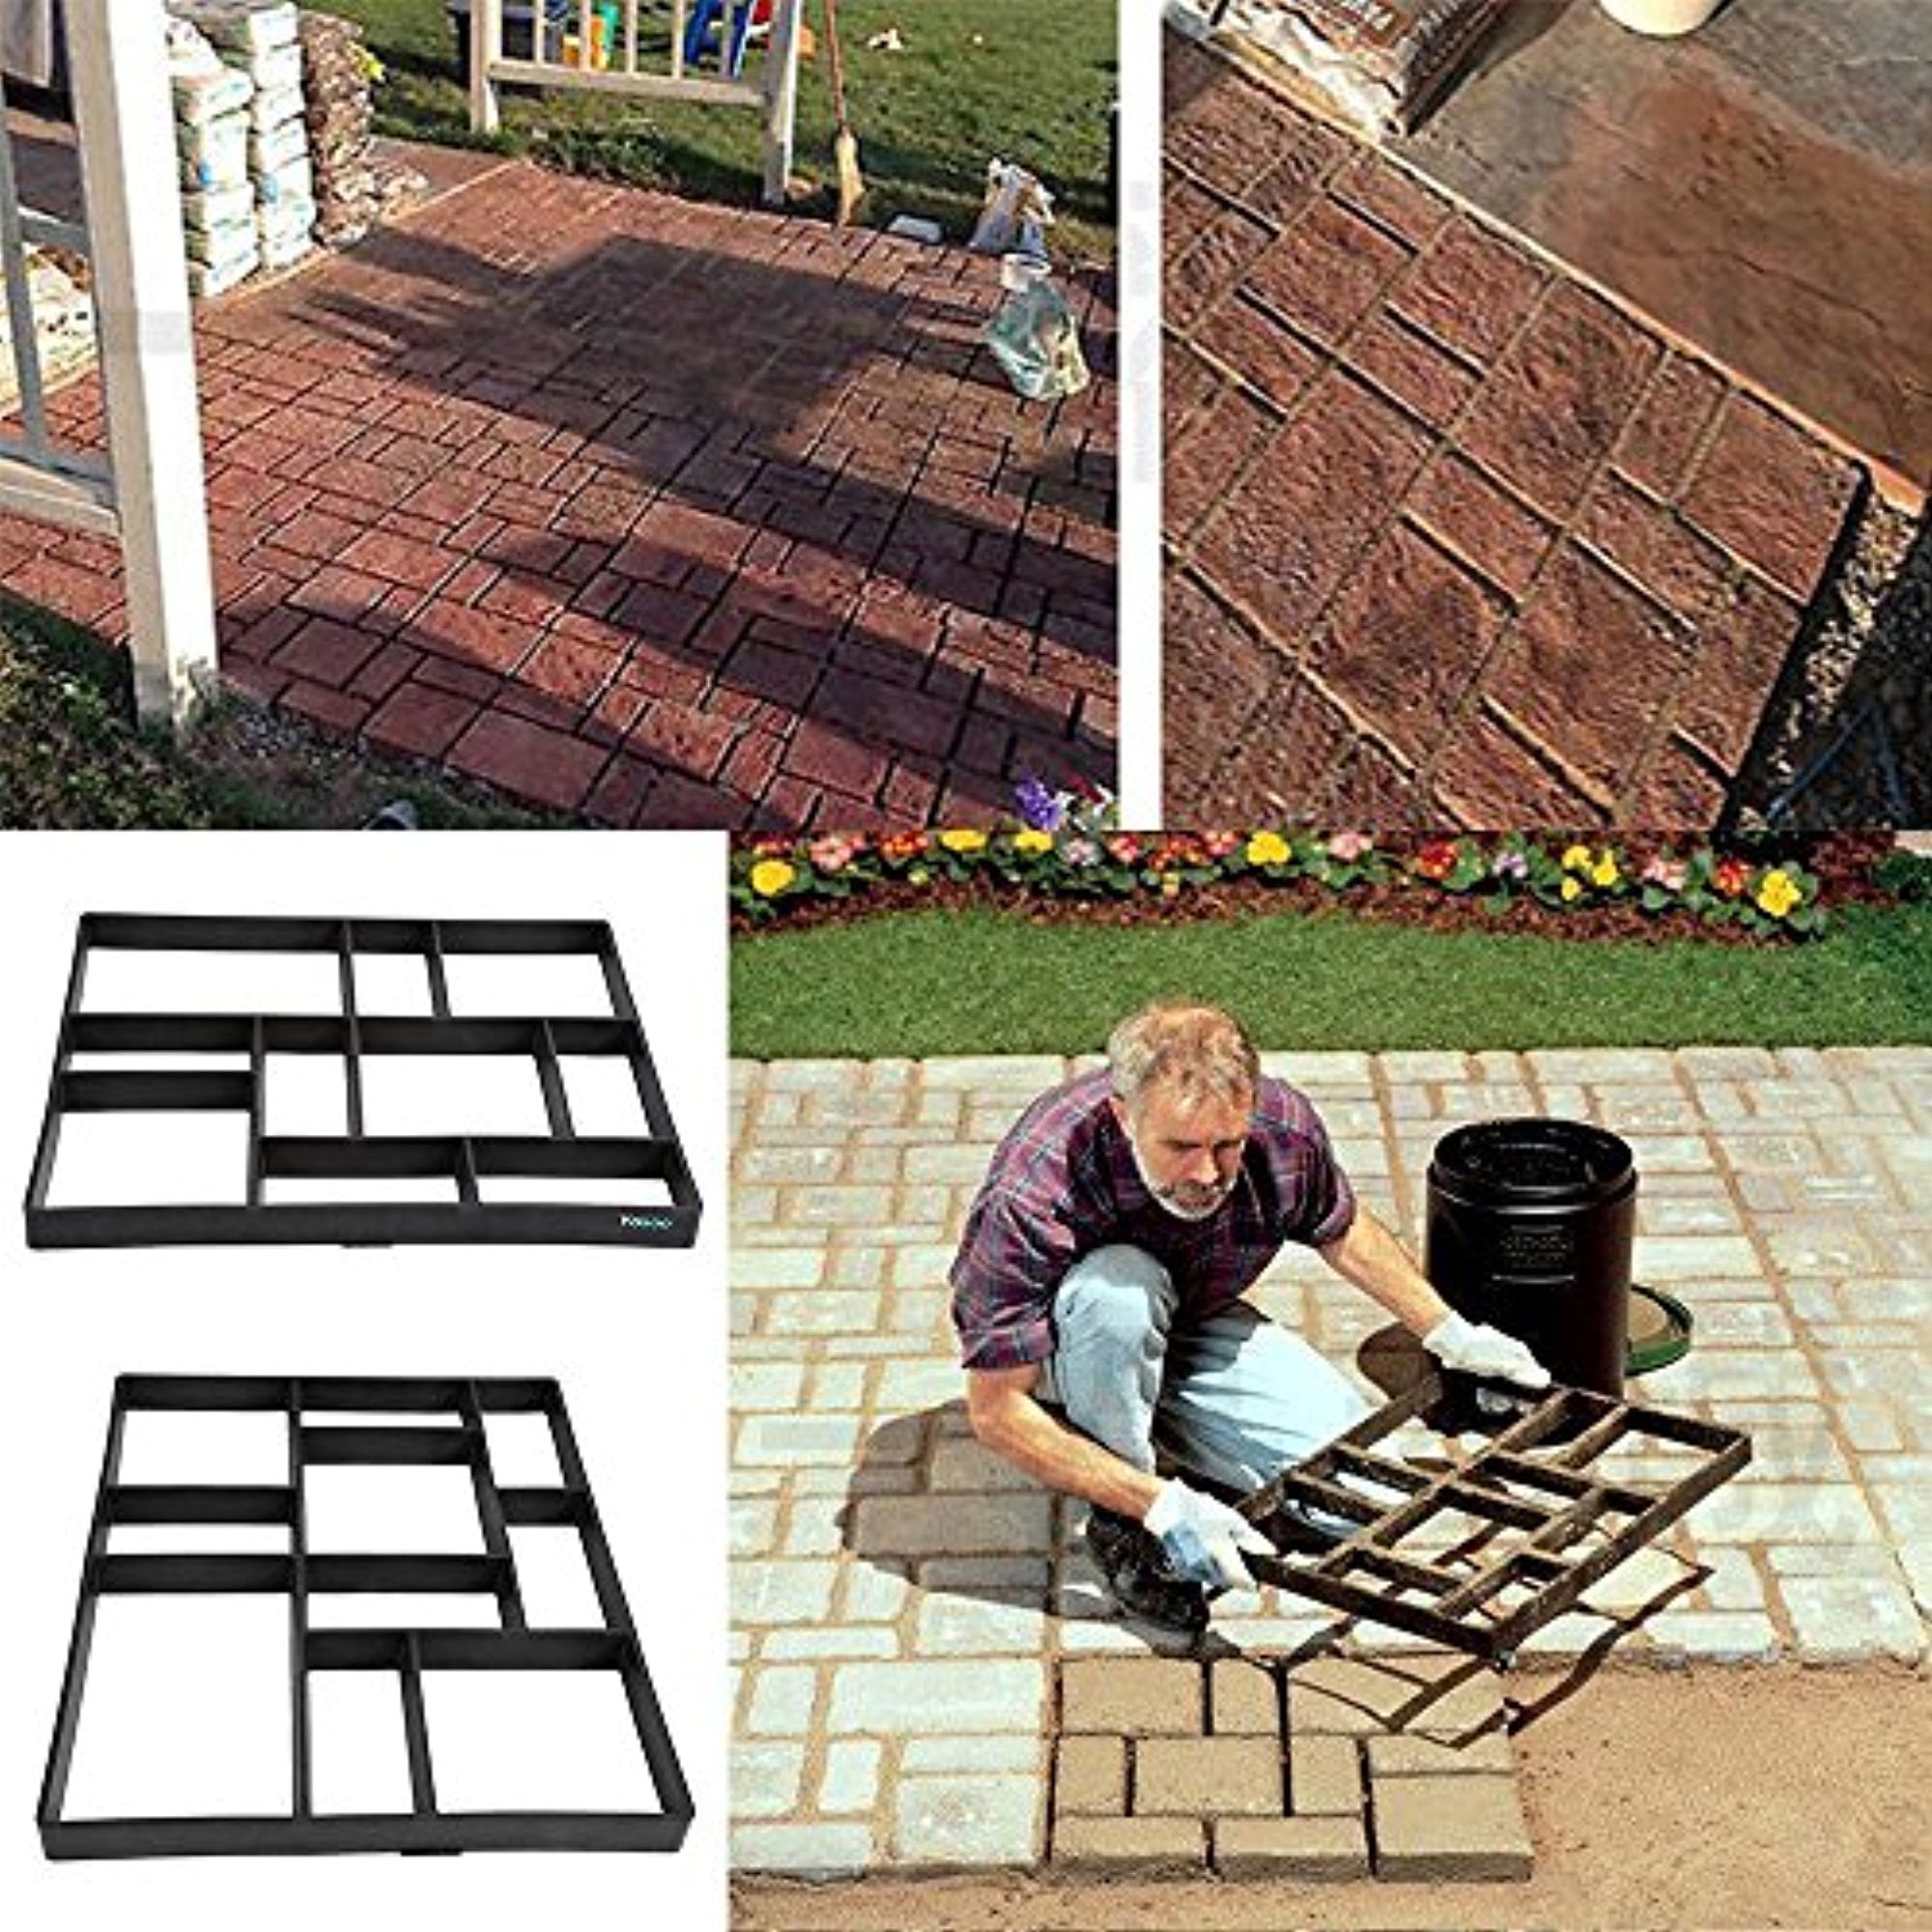 Anothera 2Pack 15.7x15.7x1.57 Walk Maker Reusable Concrete Path Maker Molds Pathmate Stone Molding Stepping Stone Paver Lawn Patio Yard Garden DIY Walkway Pavement Paving Moulds Square 